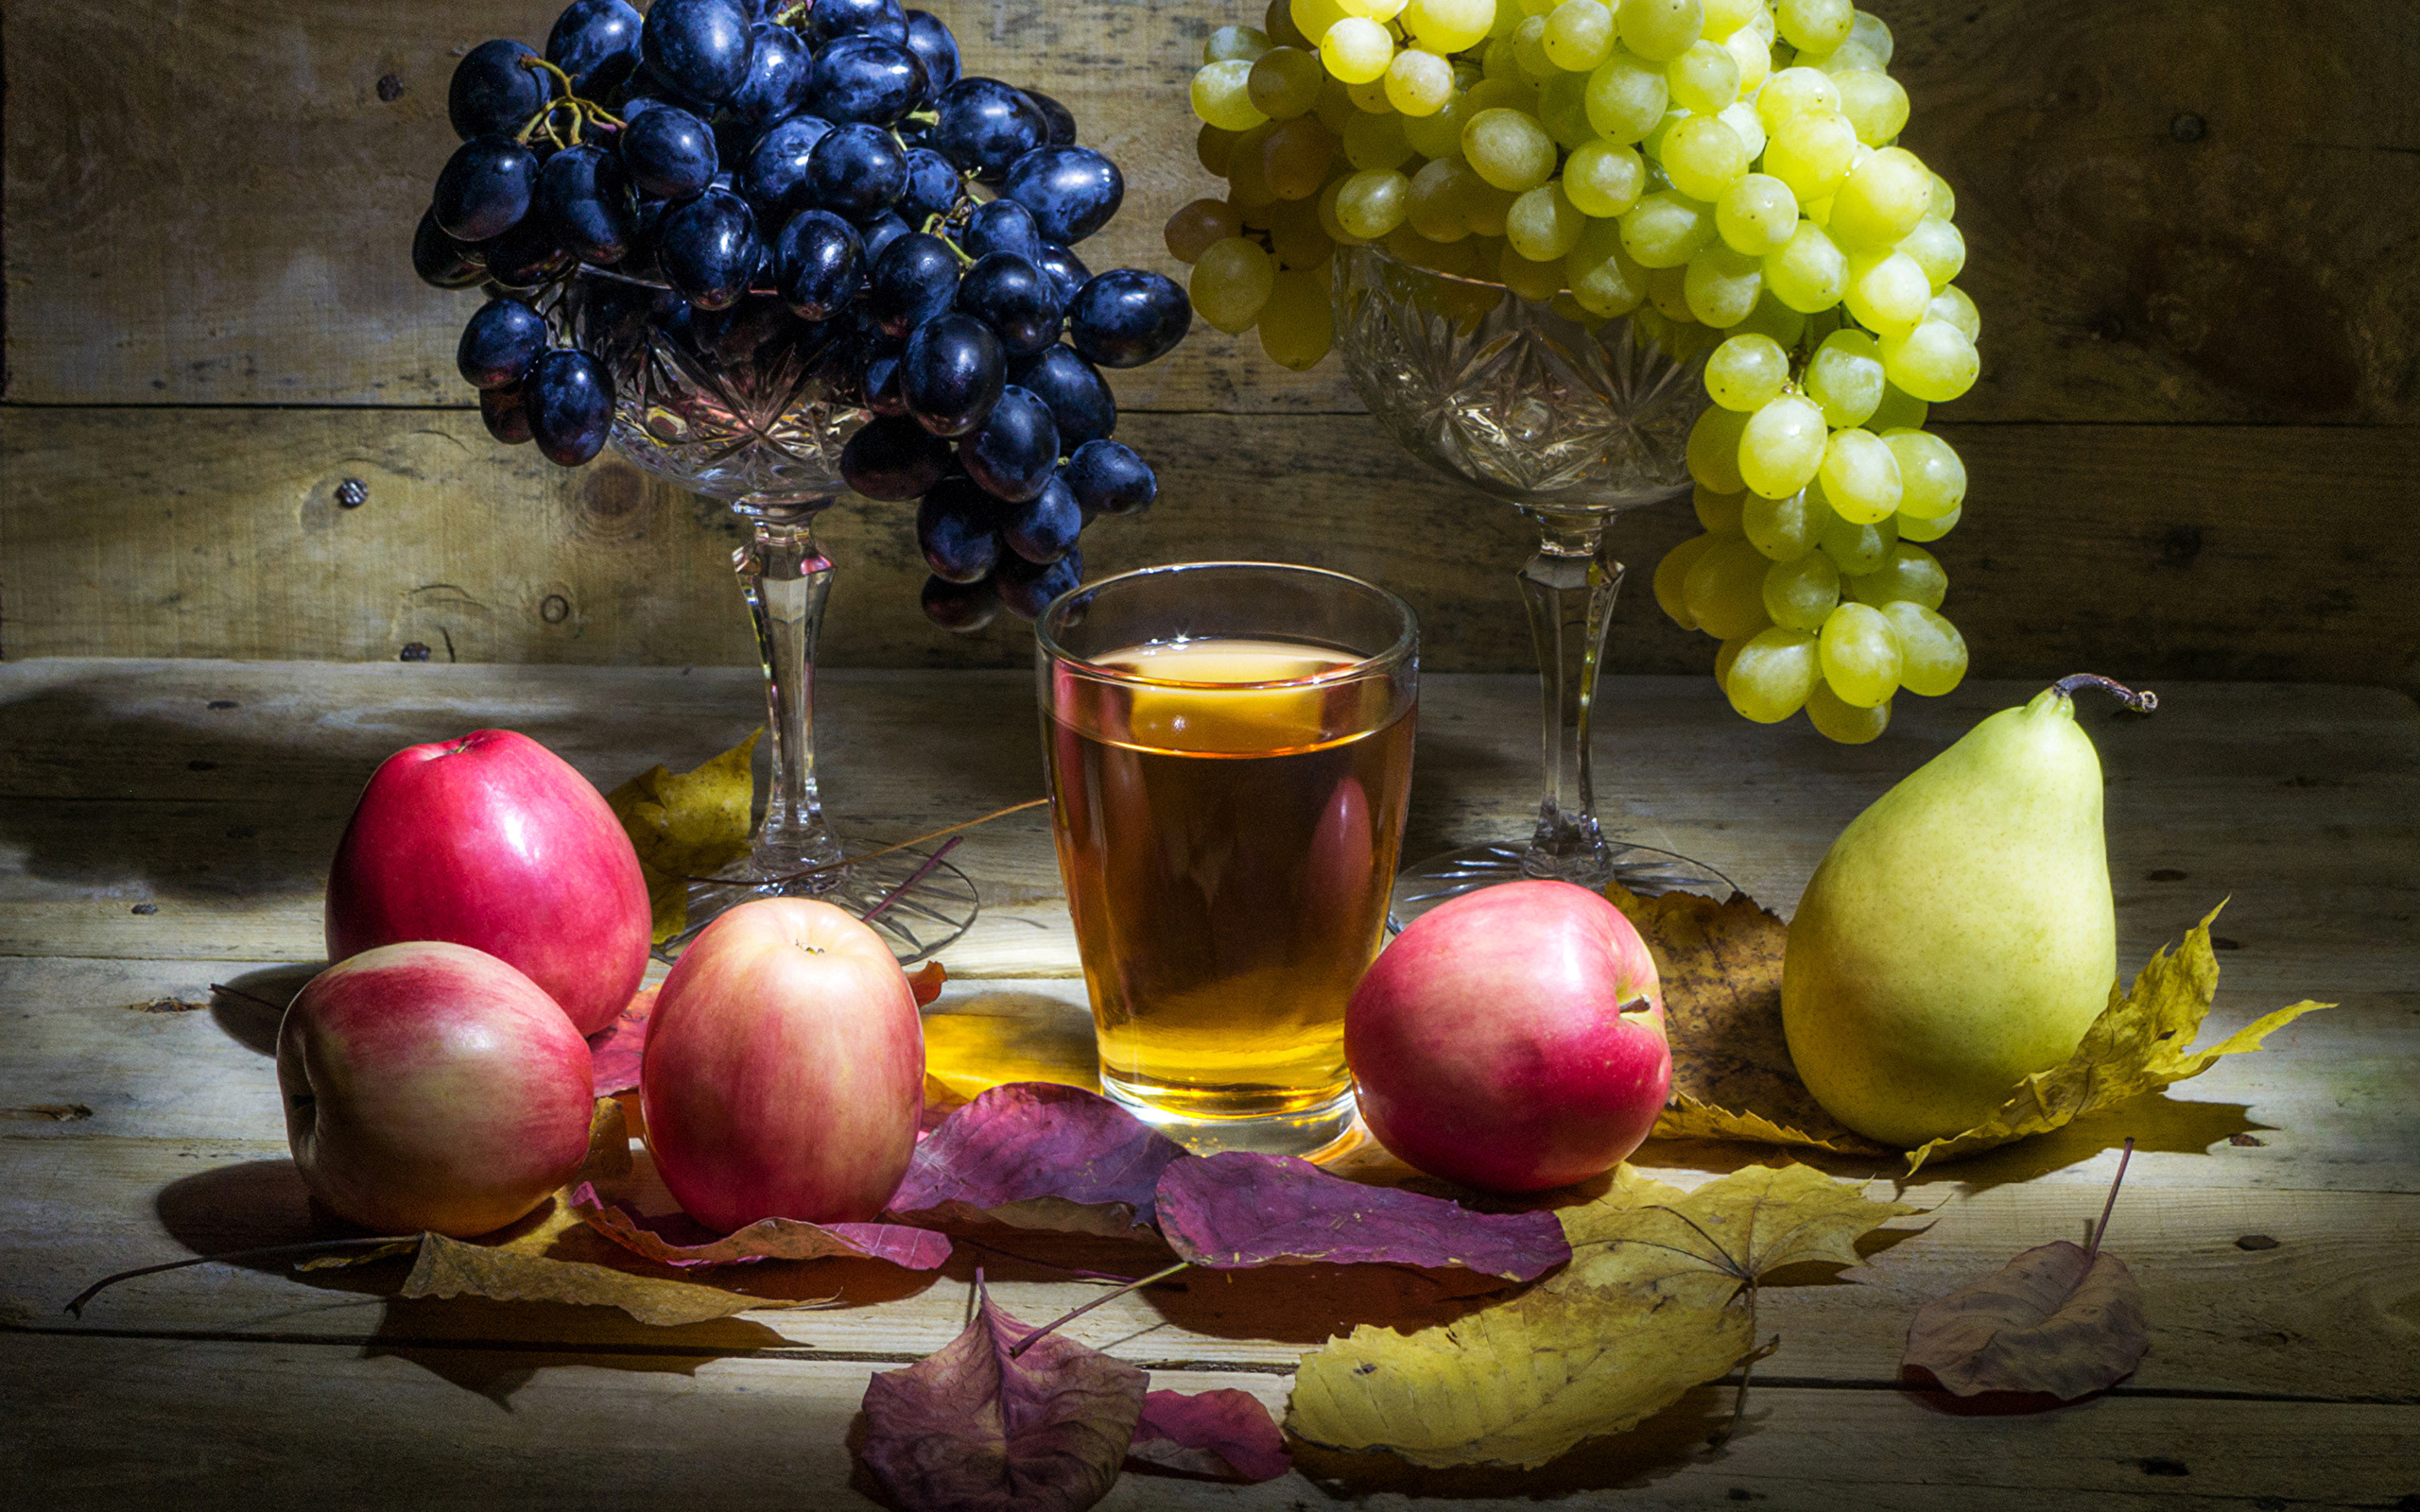 Picture Foliage Juice Pears Grapes Apples Highball glass 2560x1600